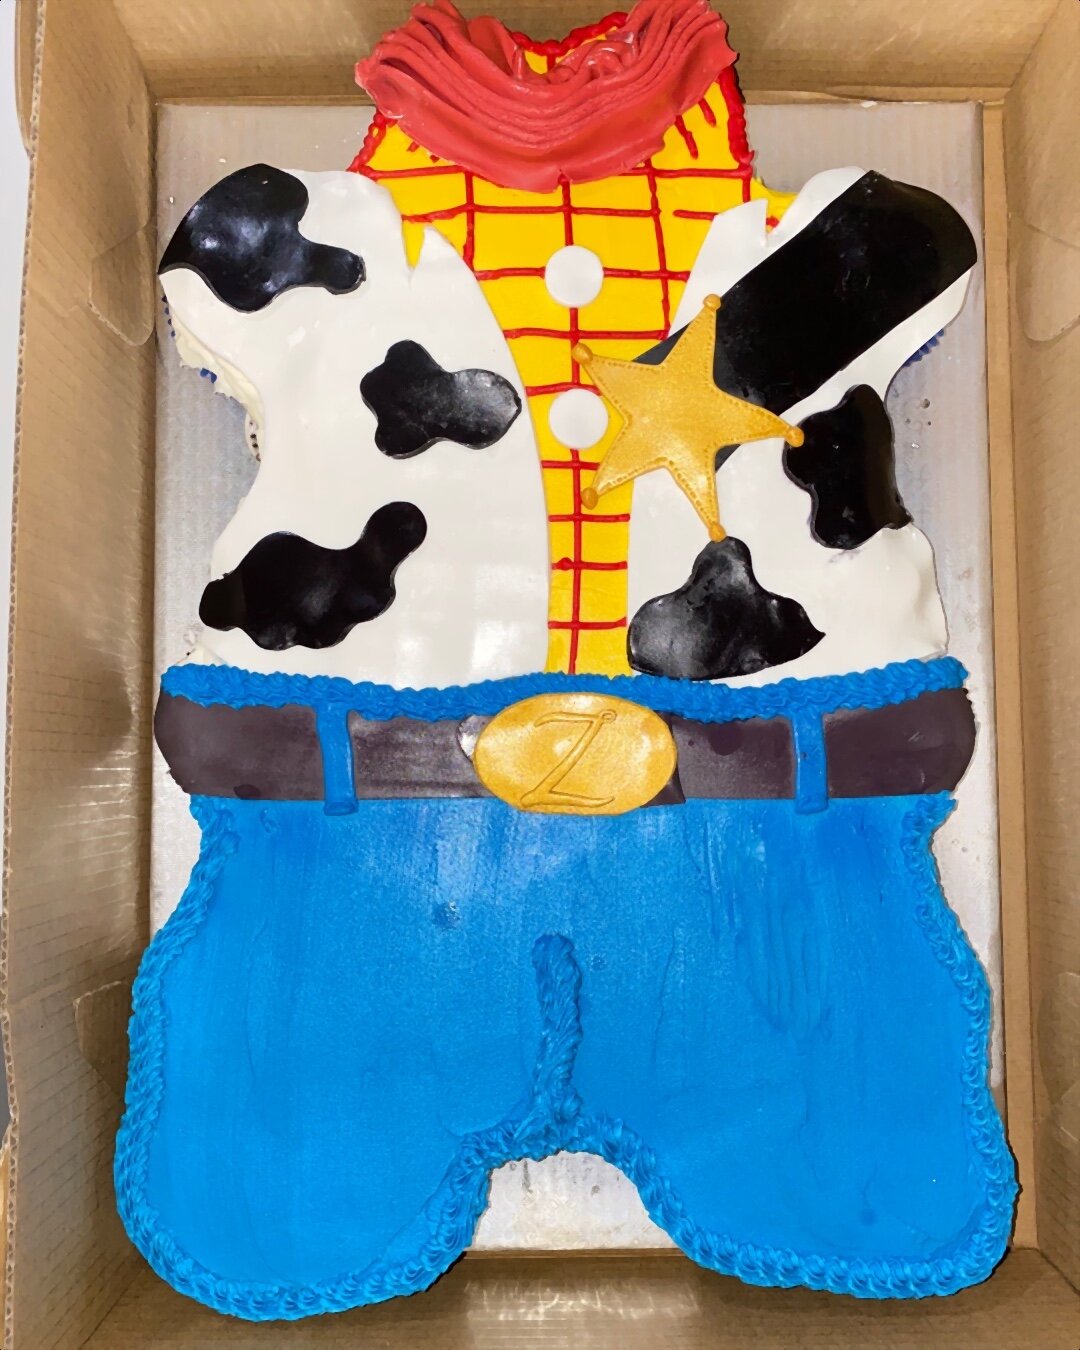 ✨&rdquo;Snap out of it Buzz..!&rdquo;- Woody⠀
⠀
Every kids birthday needs to feel like it&rsquo;s their first birthday! Here&rsquo;s a woody theme pull apart cake made for a very special 5 year old! ⠀
⠀
⠀
⠀
⠀
.⠀
.⠀
⠀
Let me make your vision come true